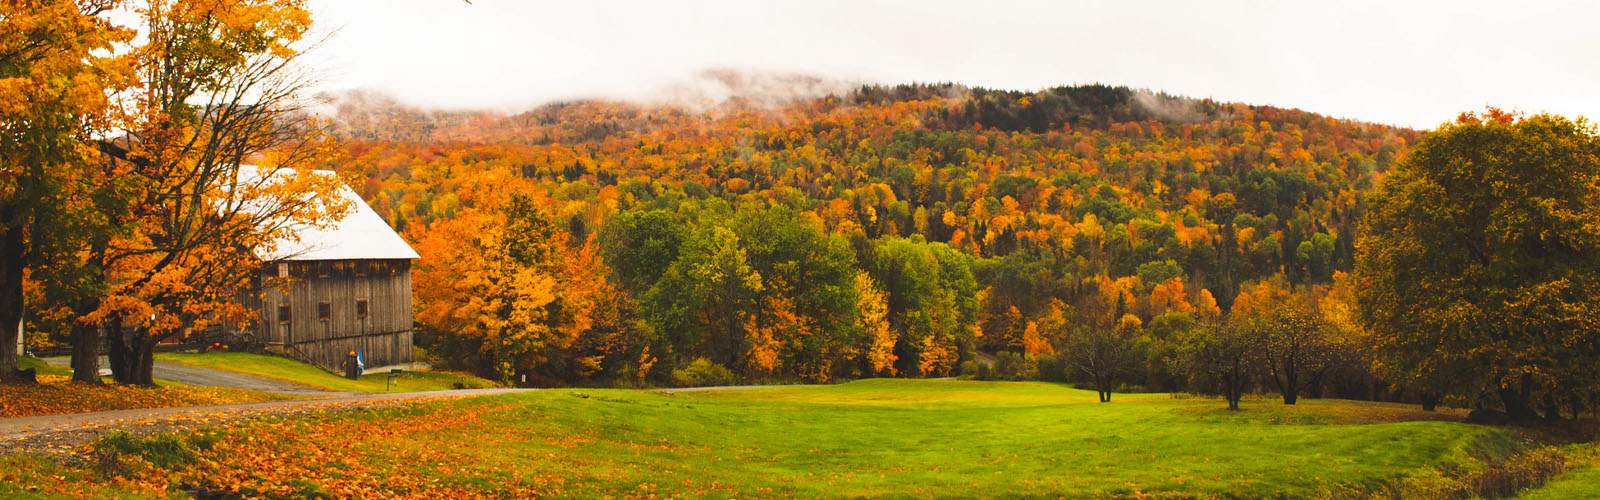 rural vermont in the fall